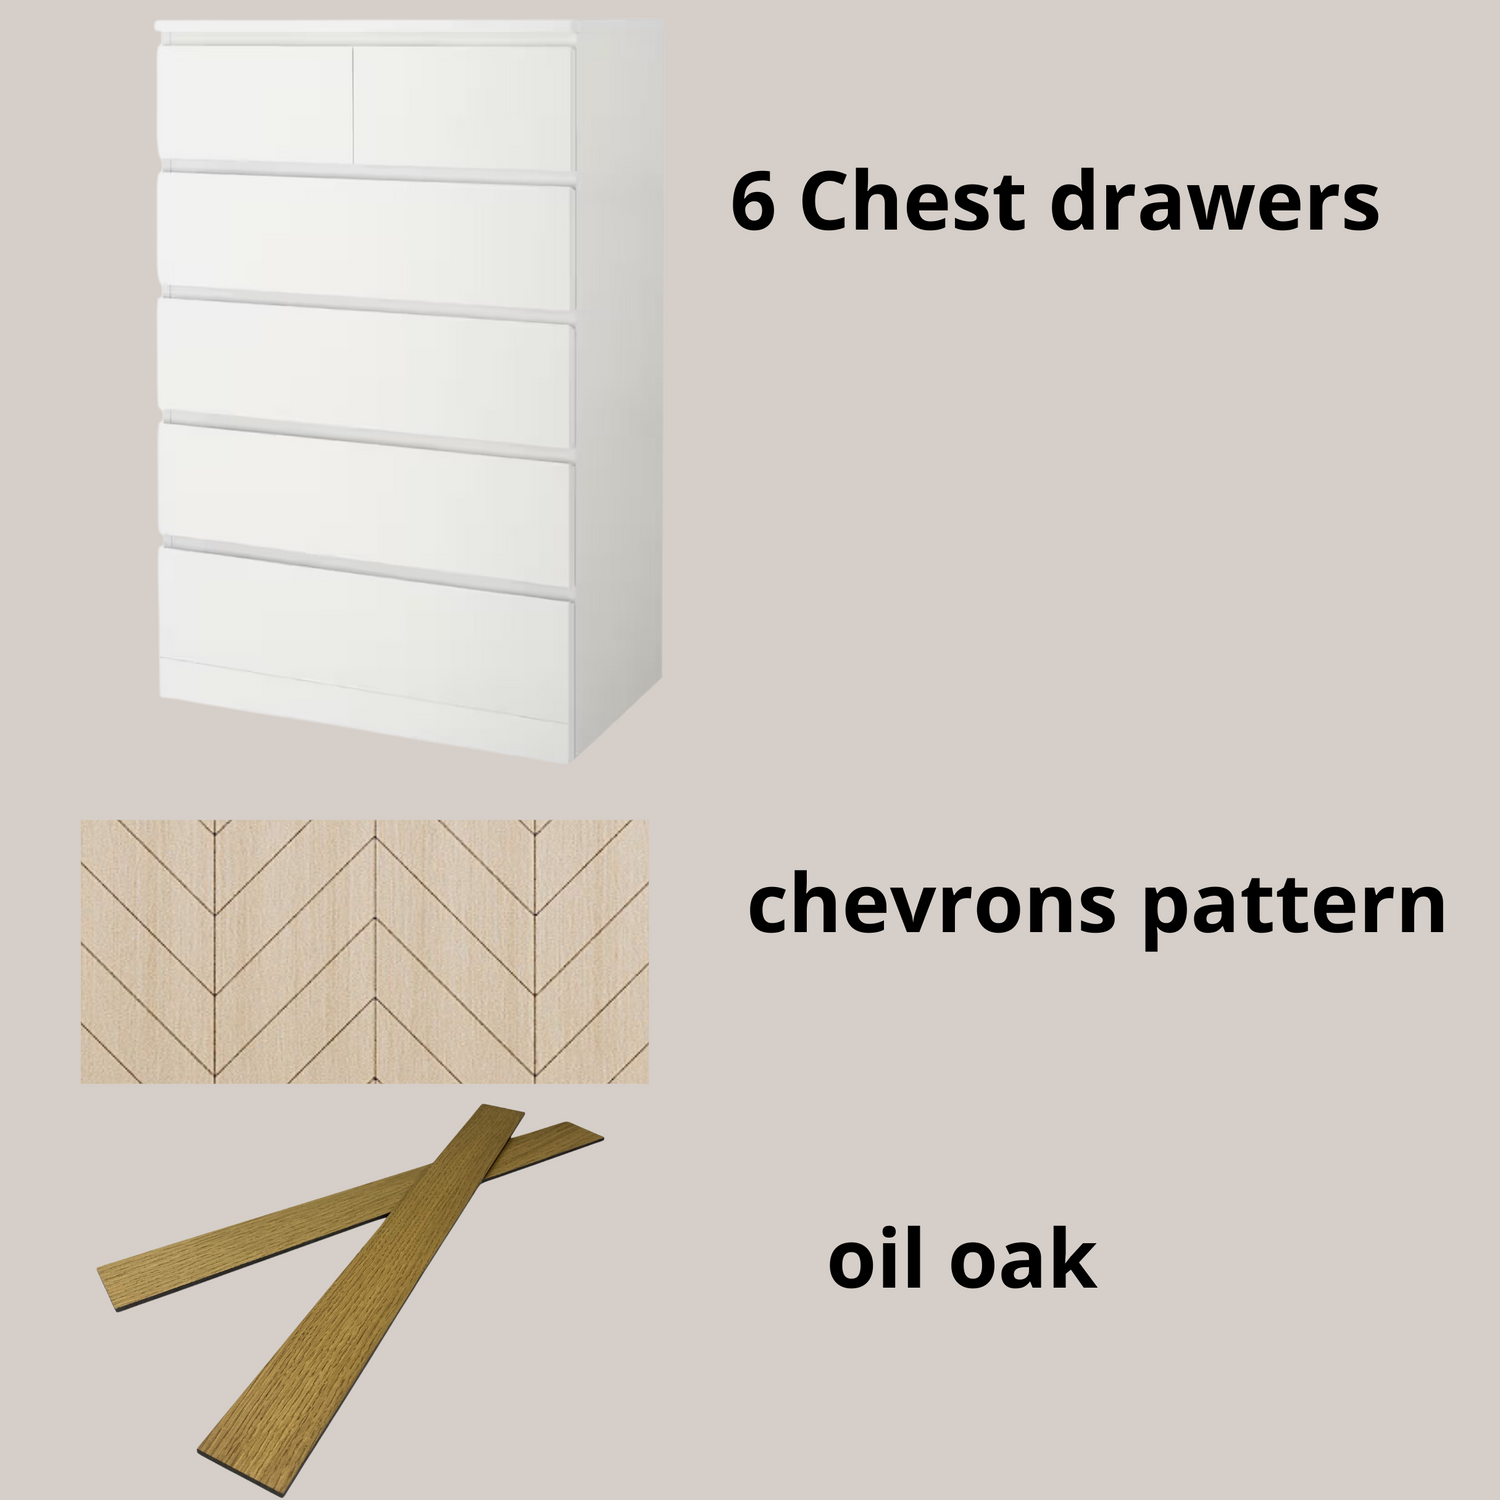 Wooden Malm dresser overlays with chevron or herringbone pattern, wooden decals for furniture drawers - Artvoom